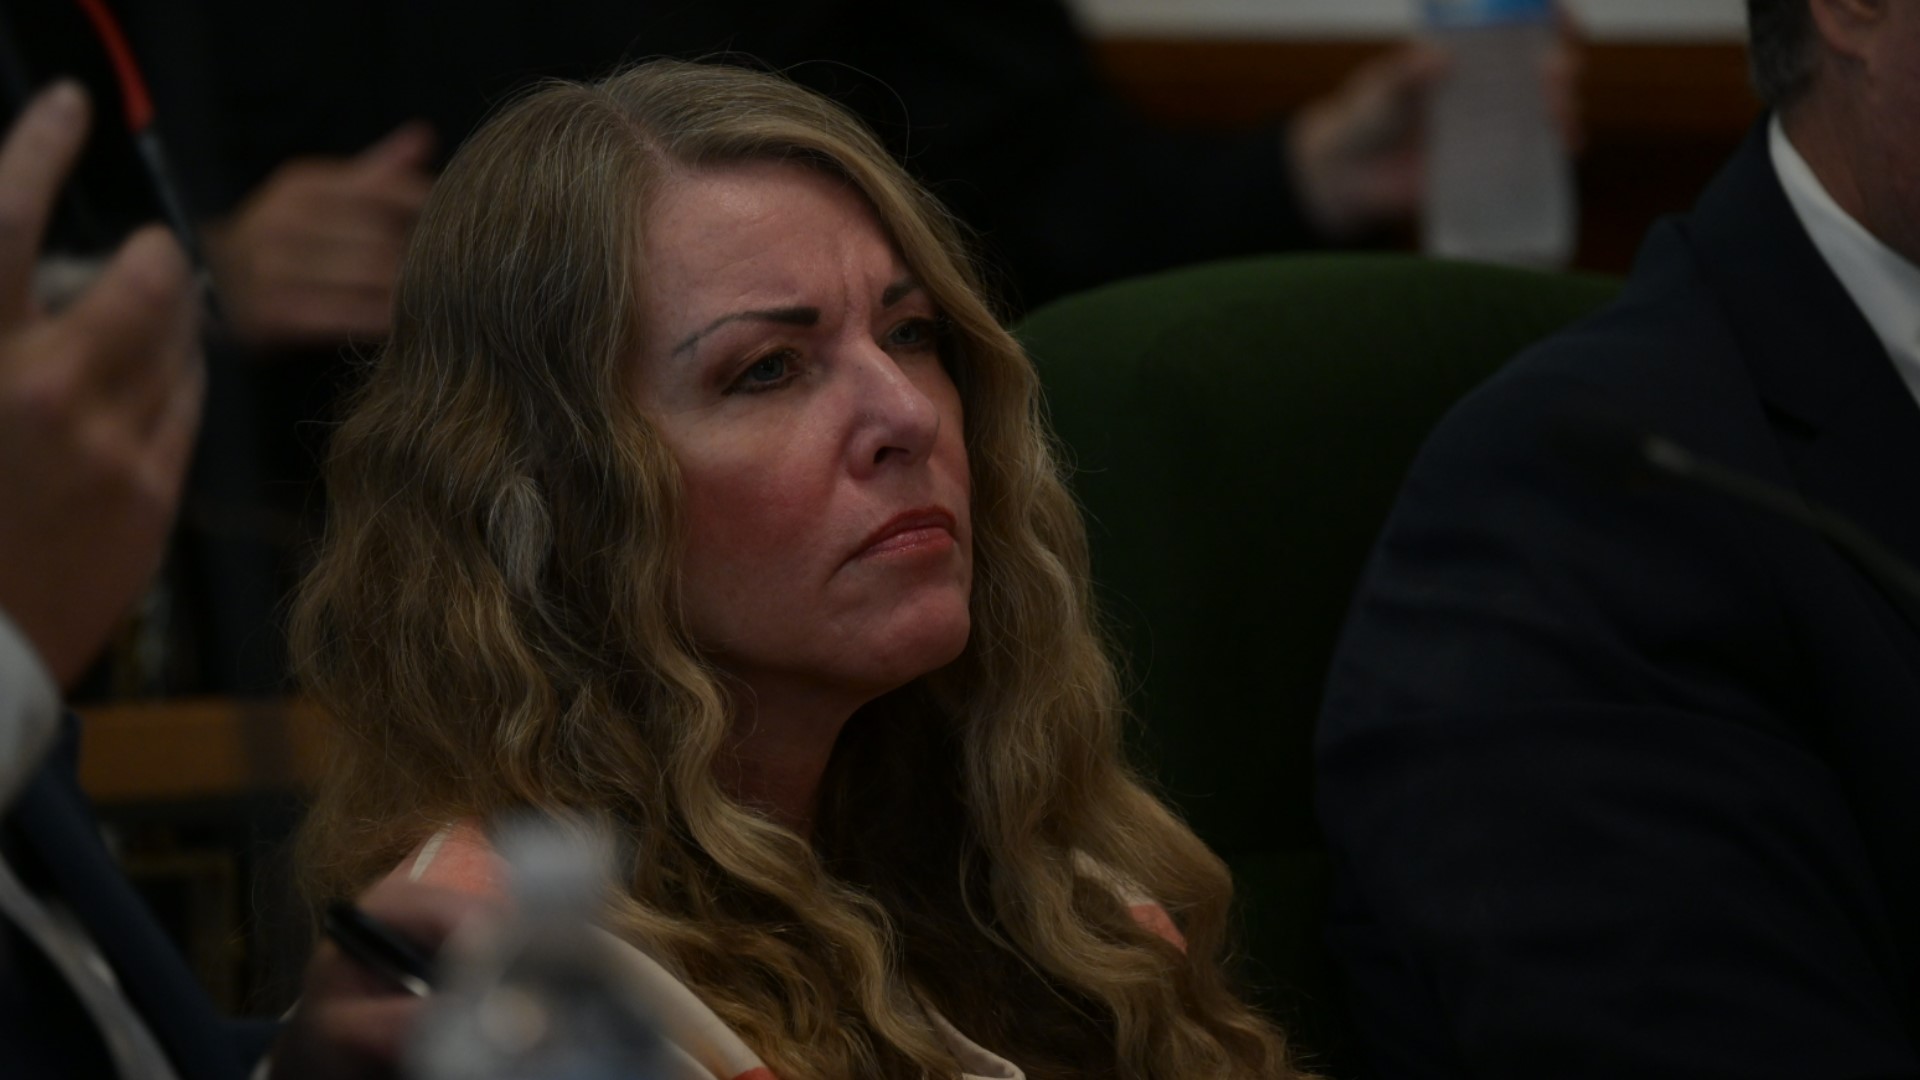 Lori Vallow Daybell was sentenced to five consecutive life terms in prison on Monday. She will never be able to seek parole.